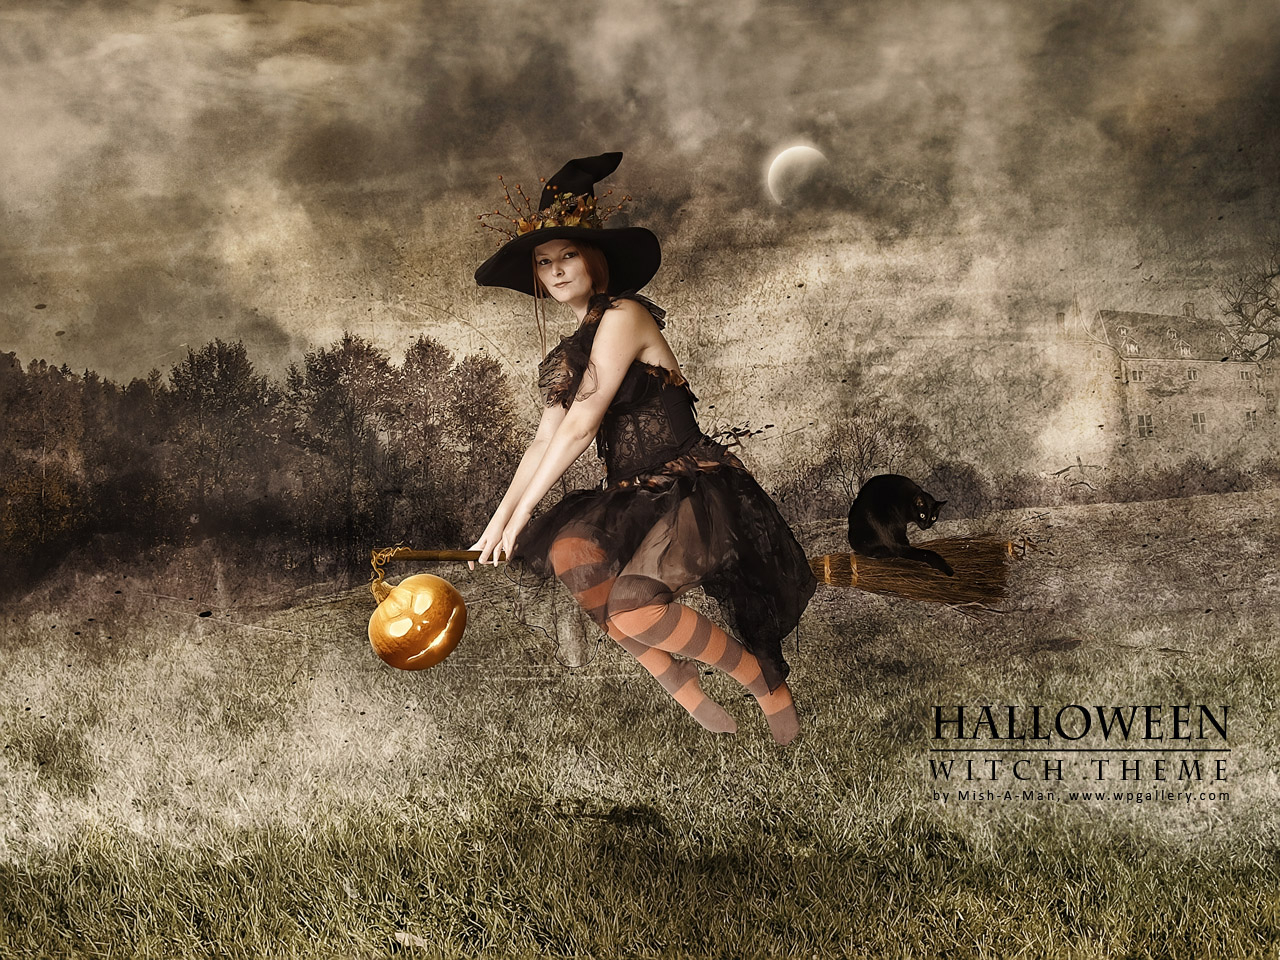 Halloween - Witch theme for 1280 x 960 resolution